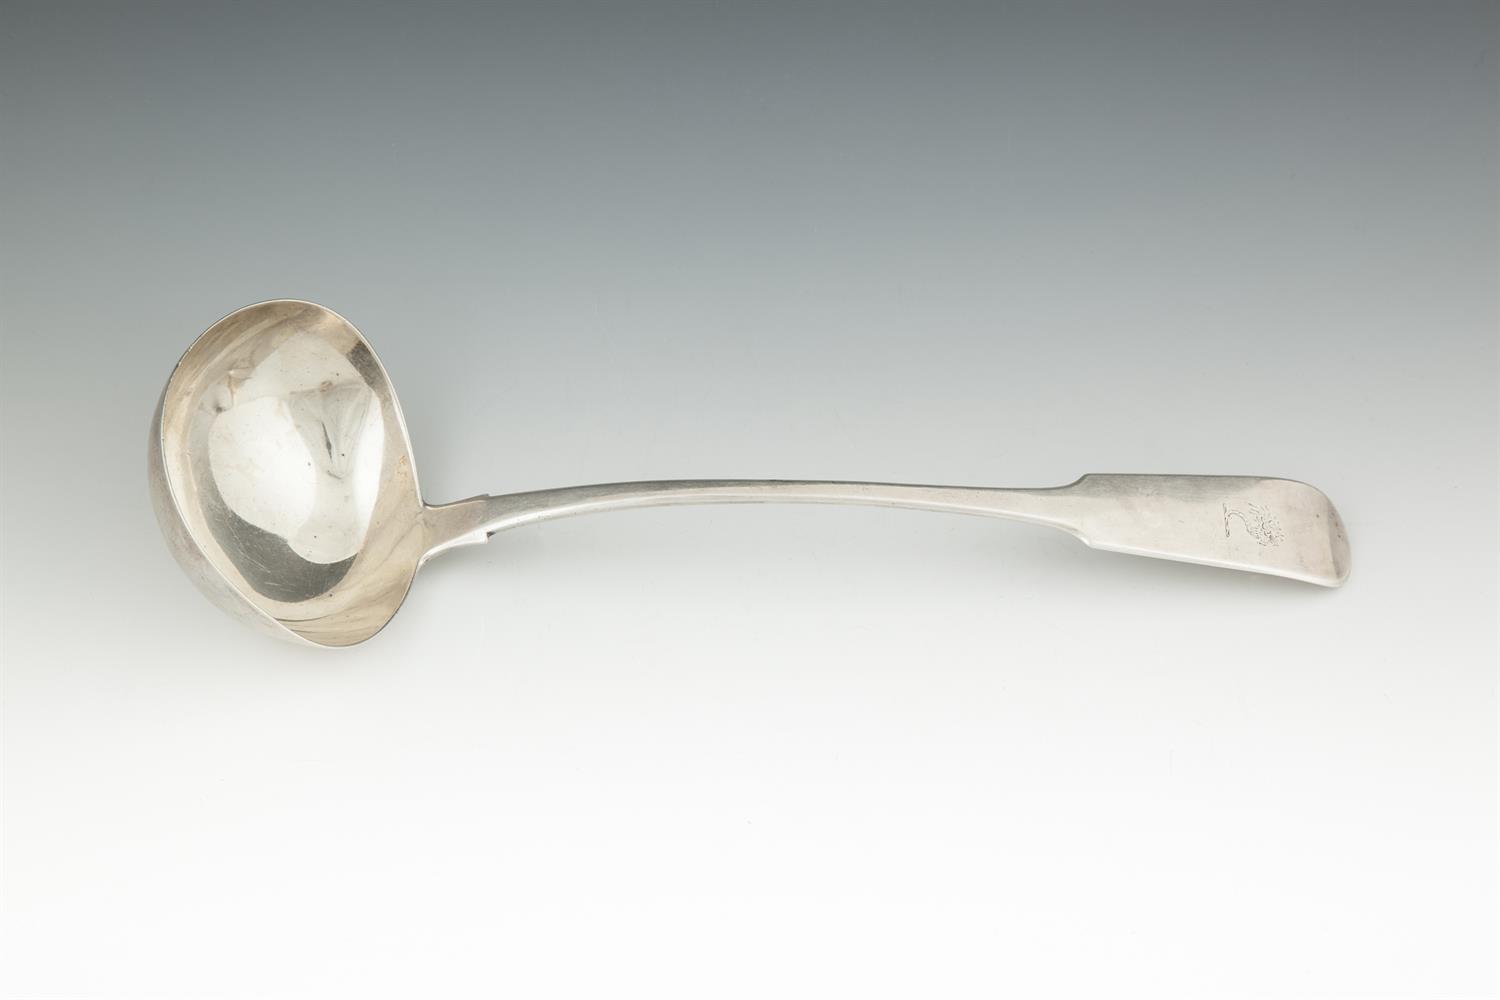 A GEORGE IV FIDDLE PATTERN SILVER LADLE, Dublin 1824, makers mark of Thomas Farnett, with rat-tail